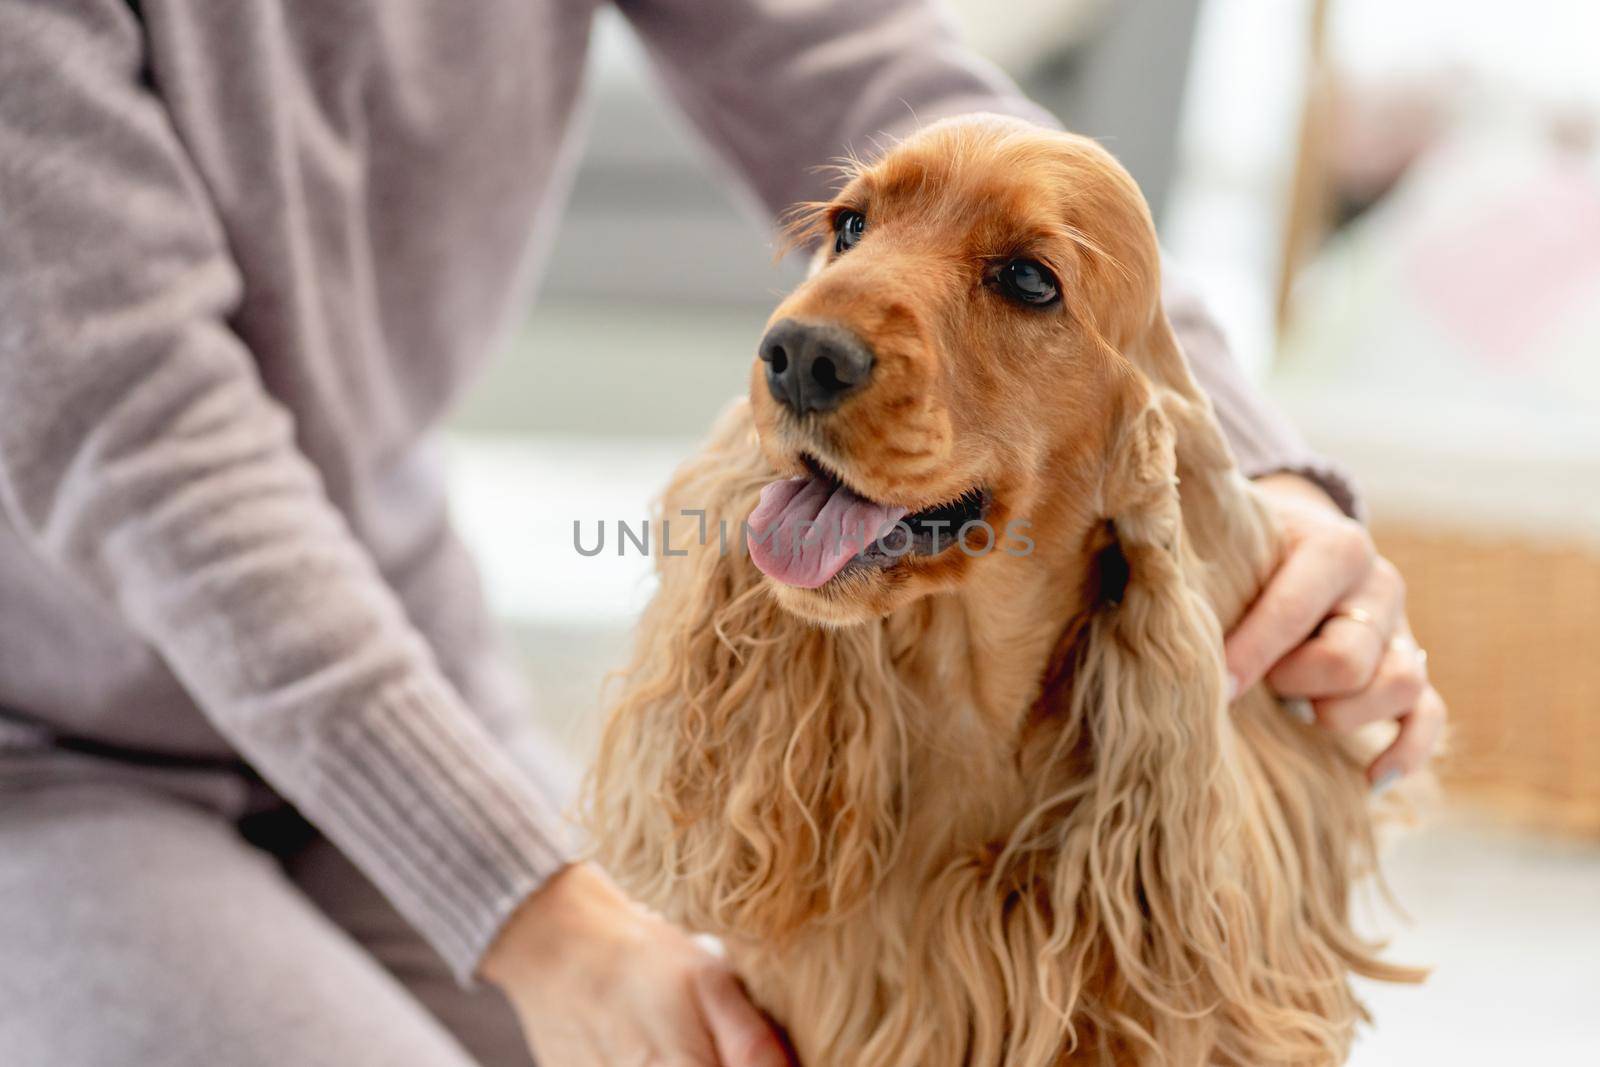 English cocker spaniel dog enjoying hands of woman owner sitting on floor at home